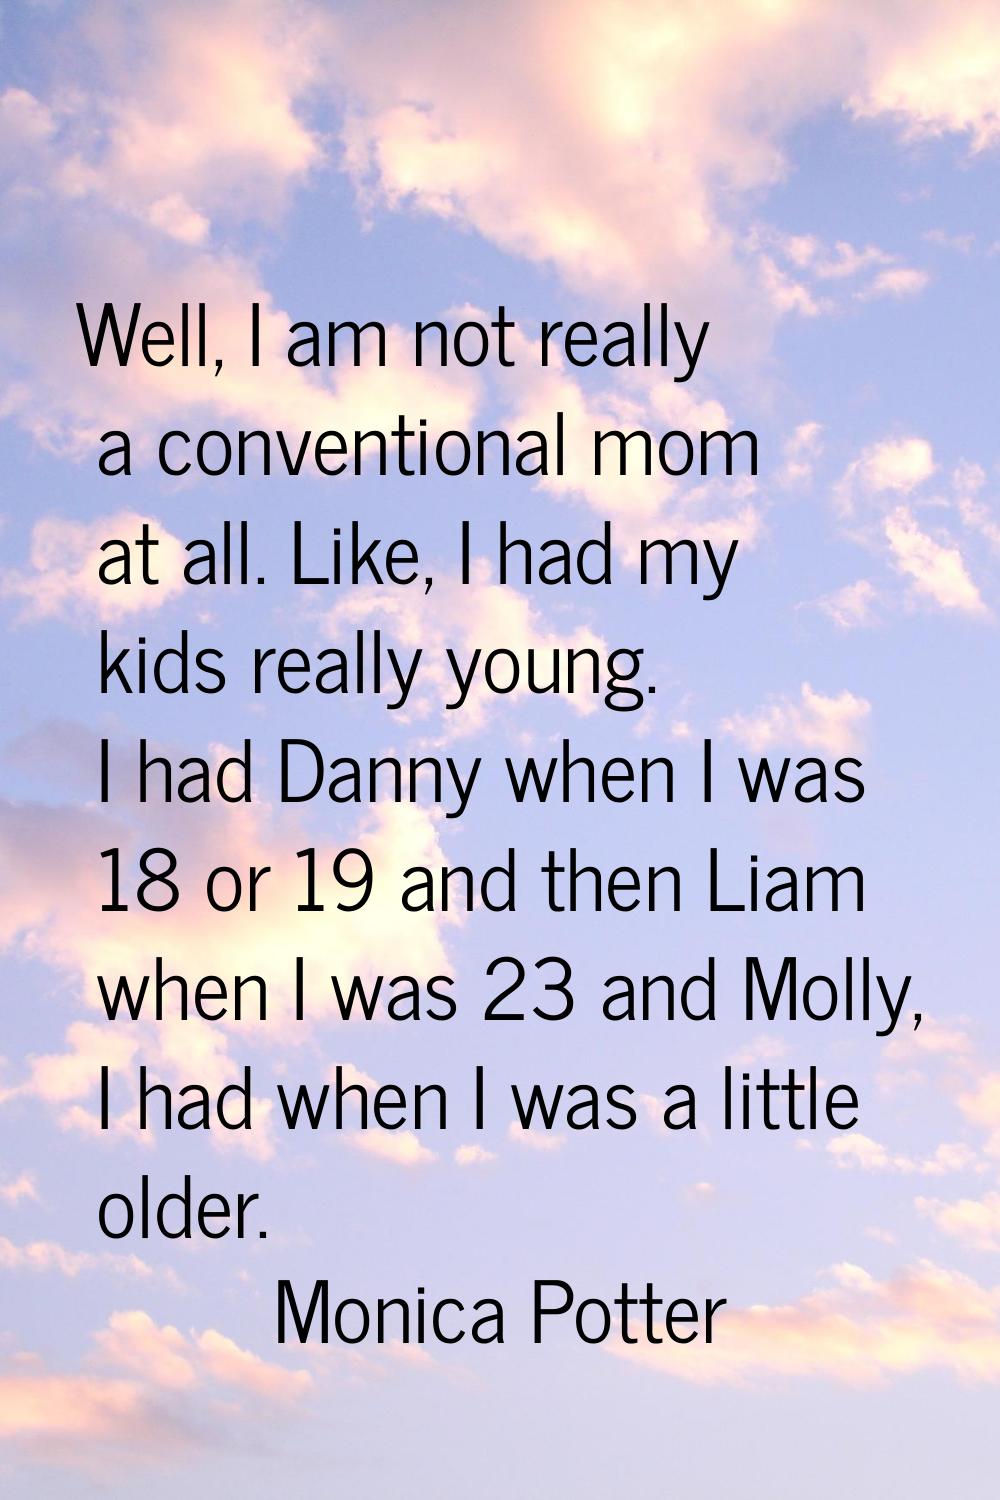 Well, I am not really a conventional mom at all. Like, I had my kids really young. I had Danny when